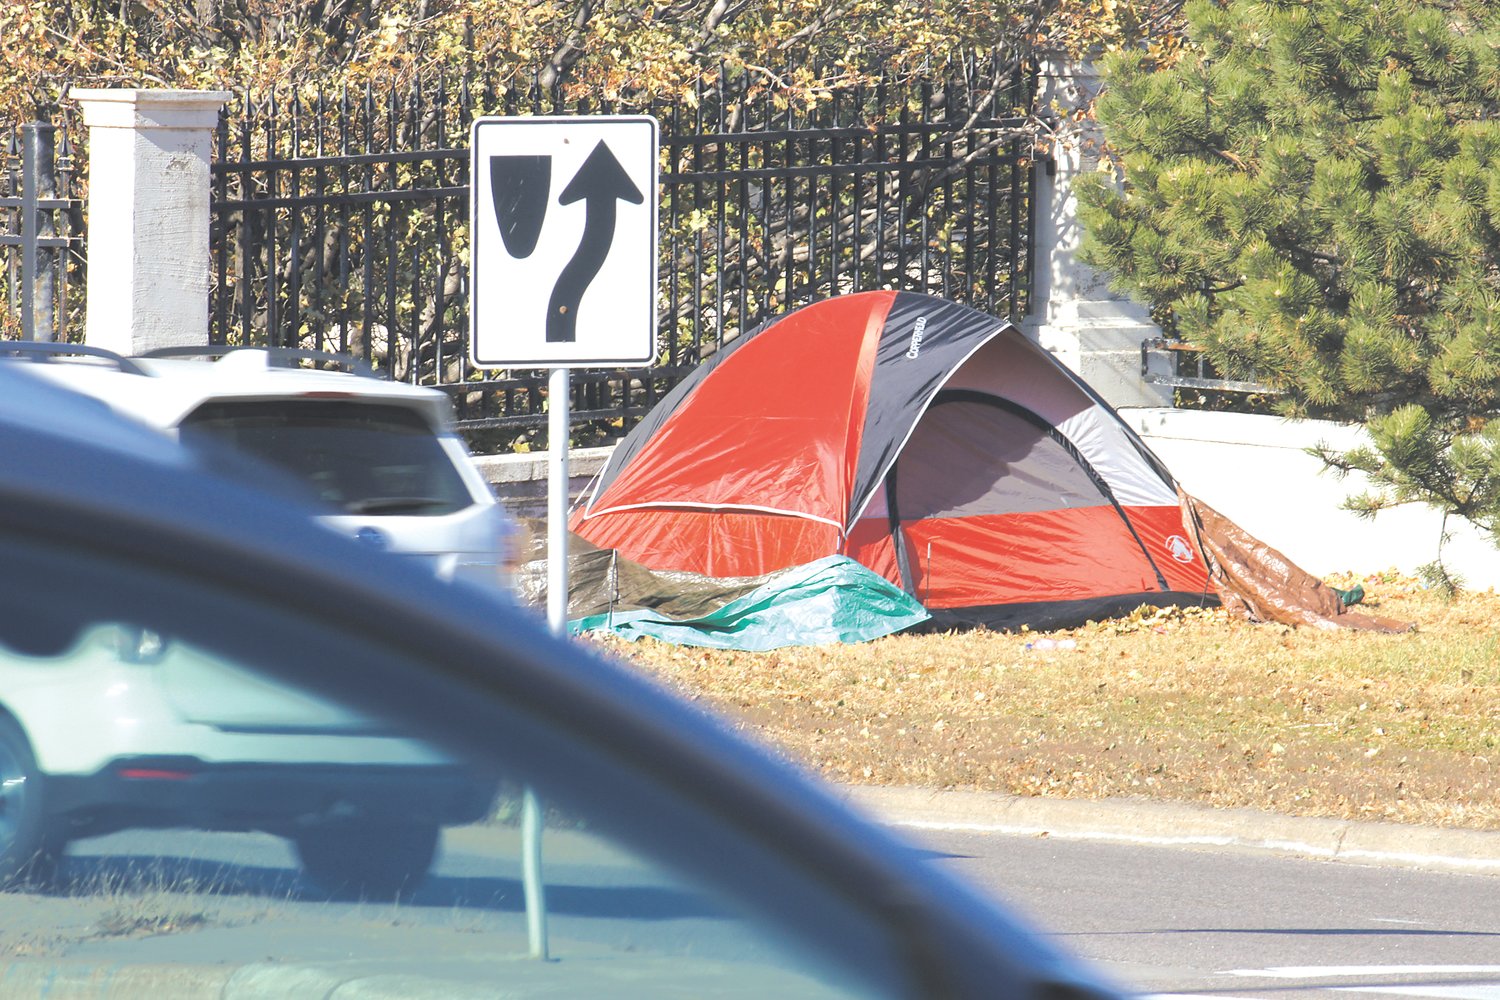 Tents are pitched near bridges and in wooded sites across the metro area. (Photo by Terry Faust)